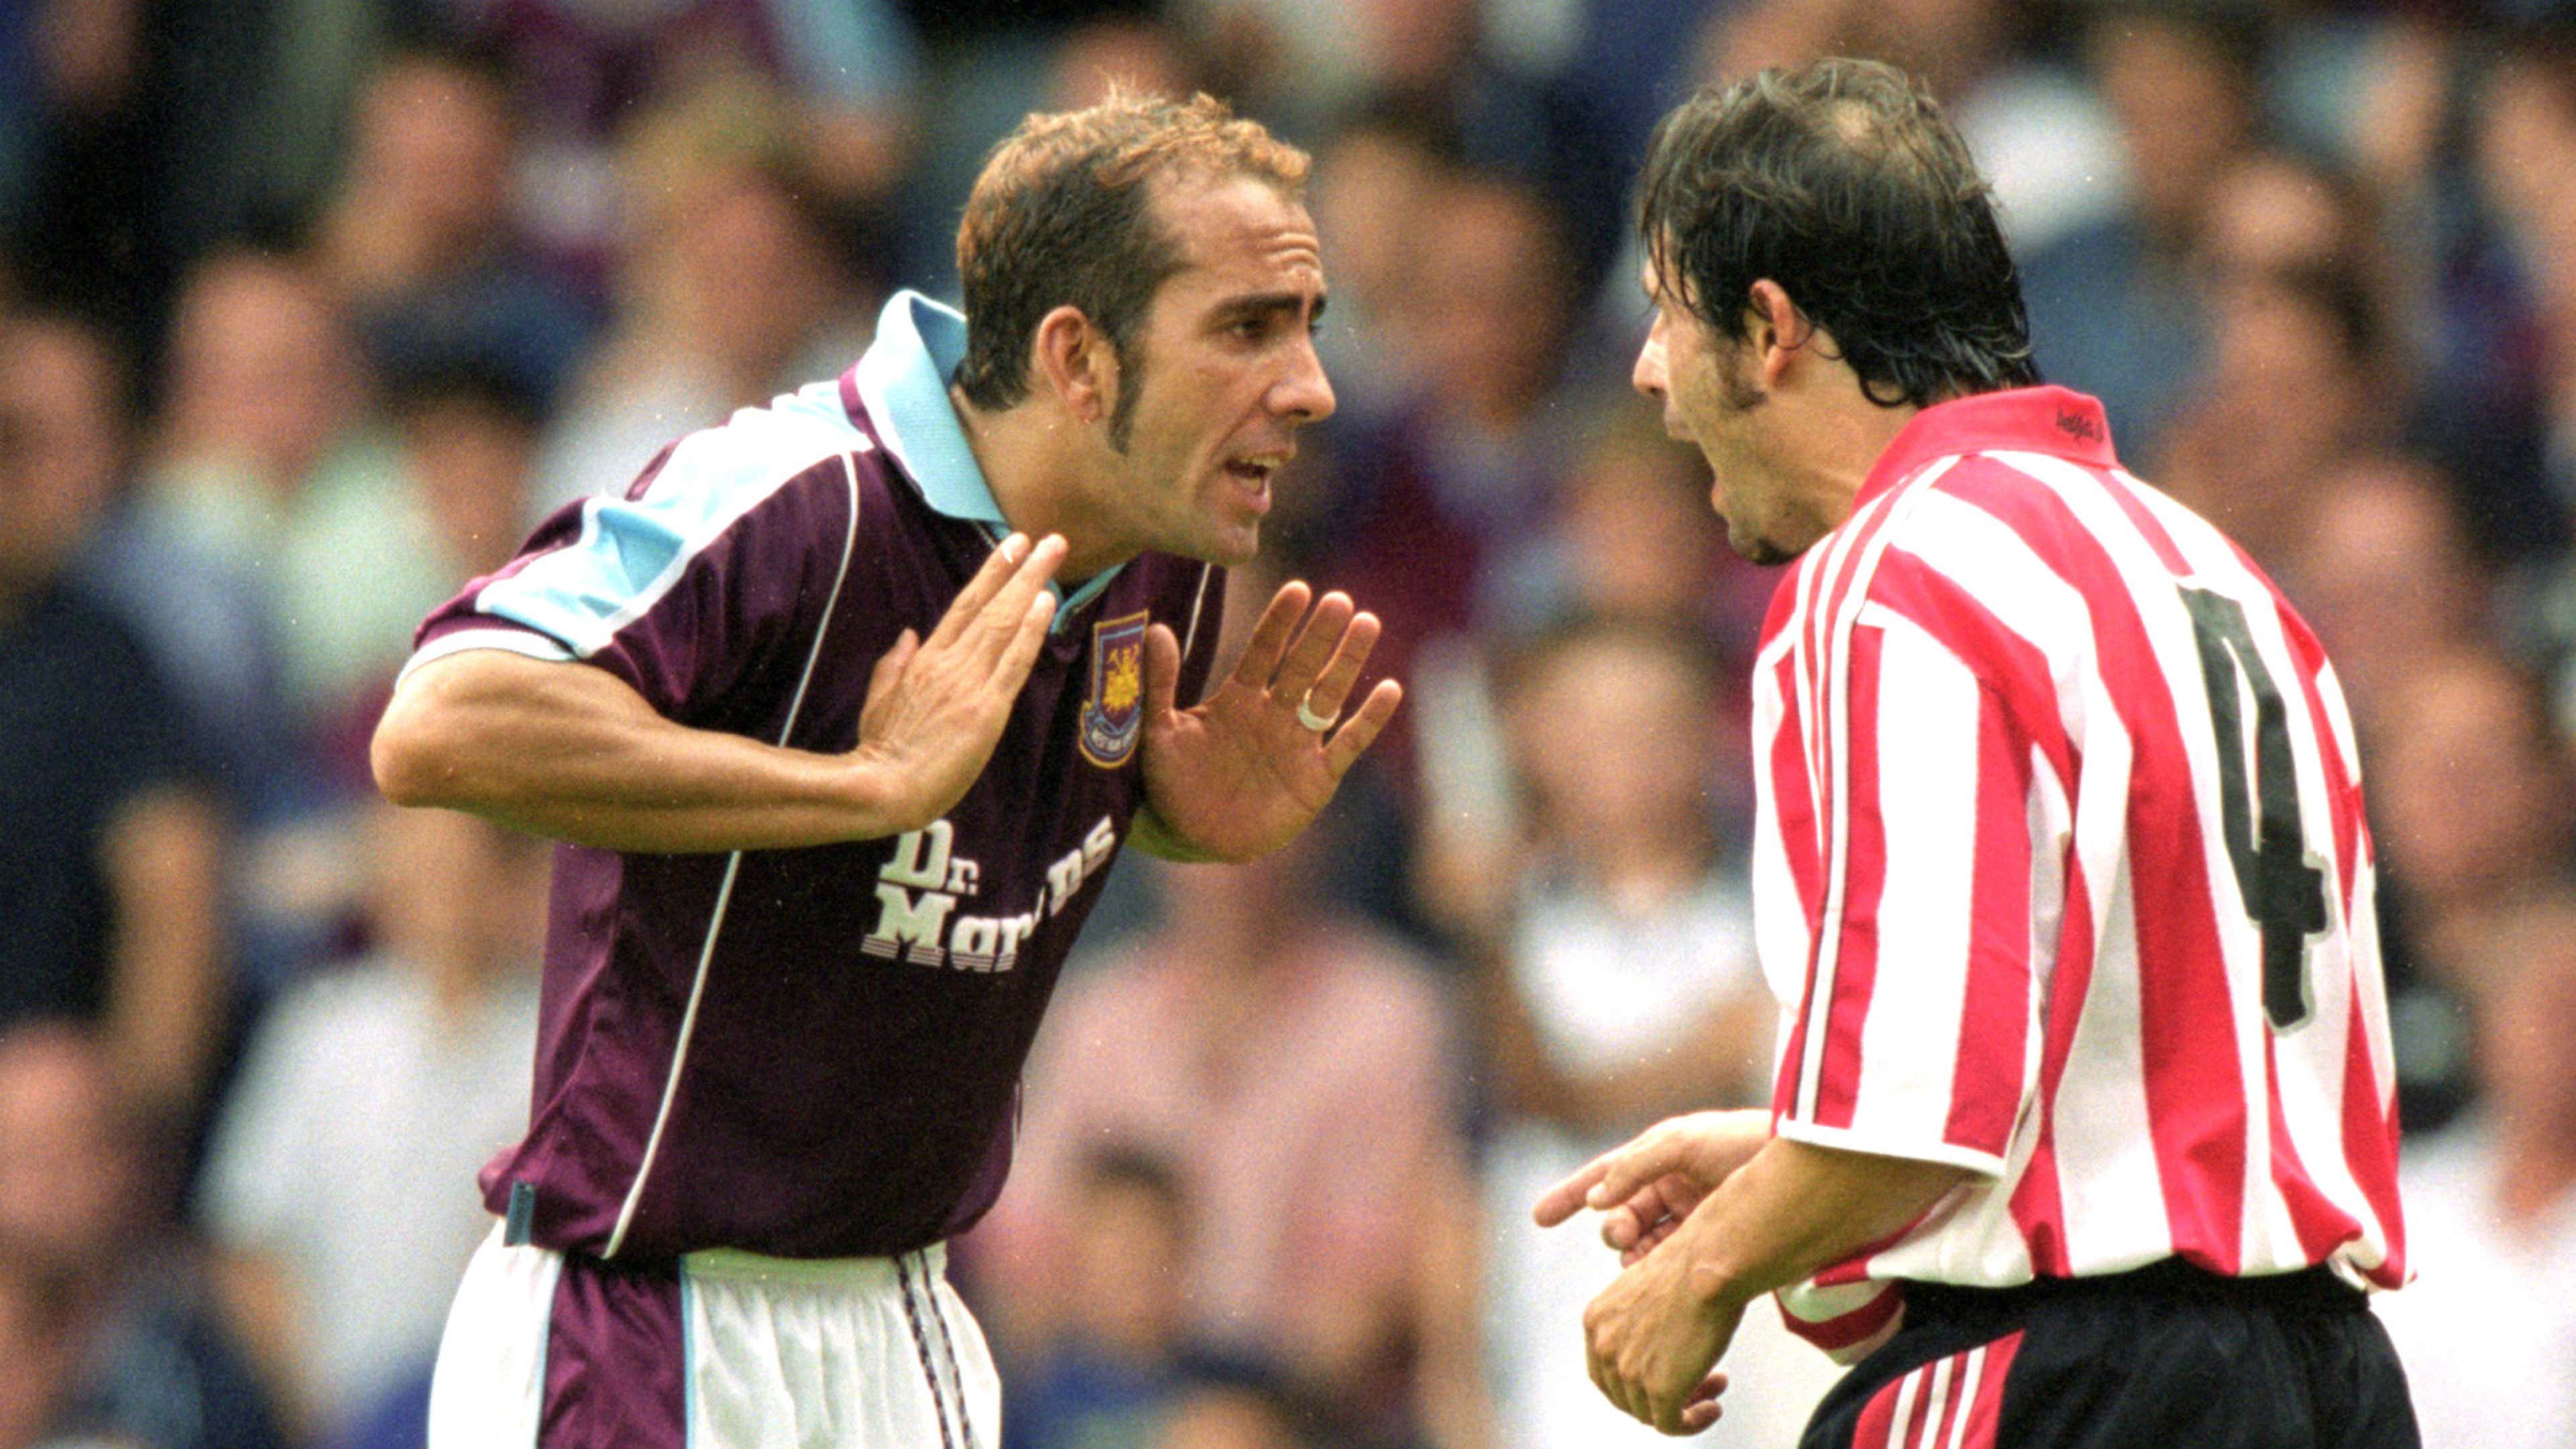 Redknapp explains how West Ham almost snubbed Di Canio - Football365